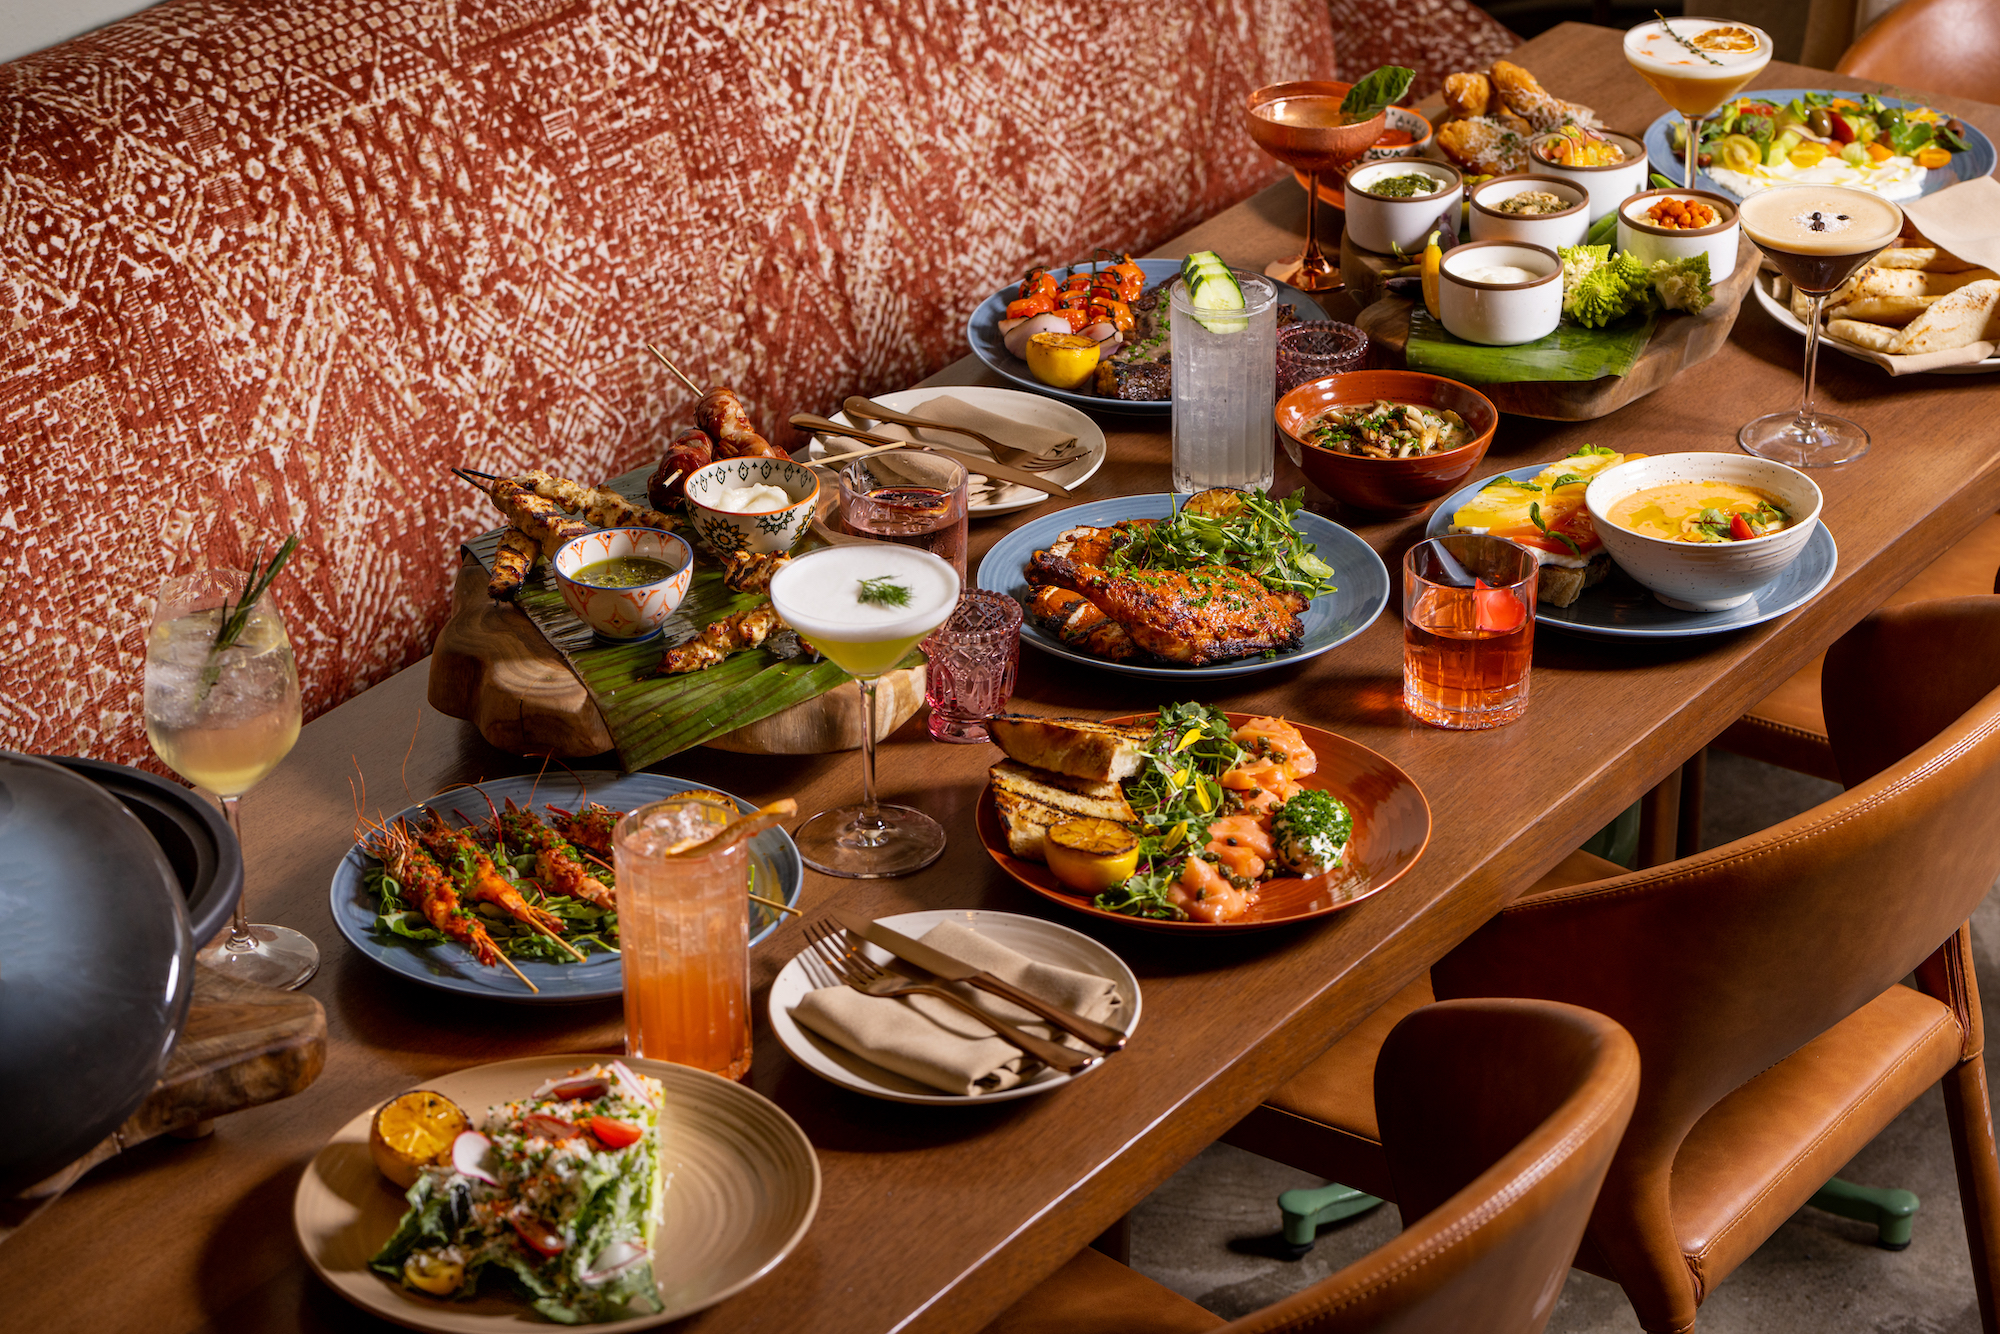 A side angle of a long wooden table filled with meats and vegetables and cocktails at a new restaurant at daytime.